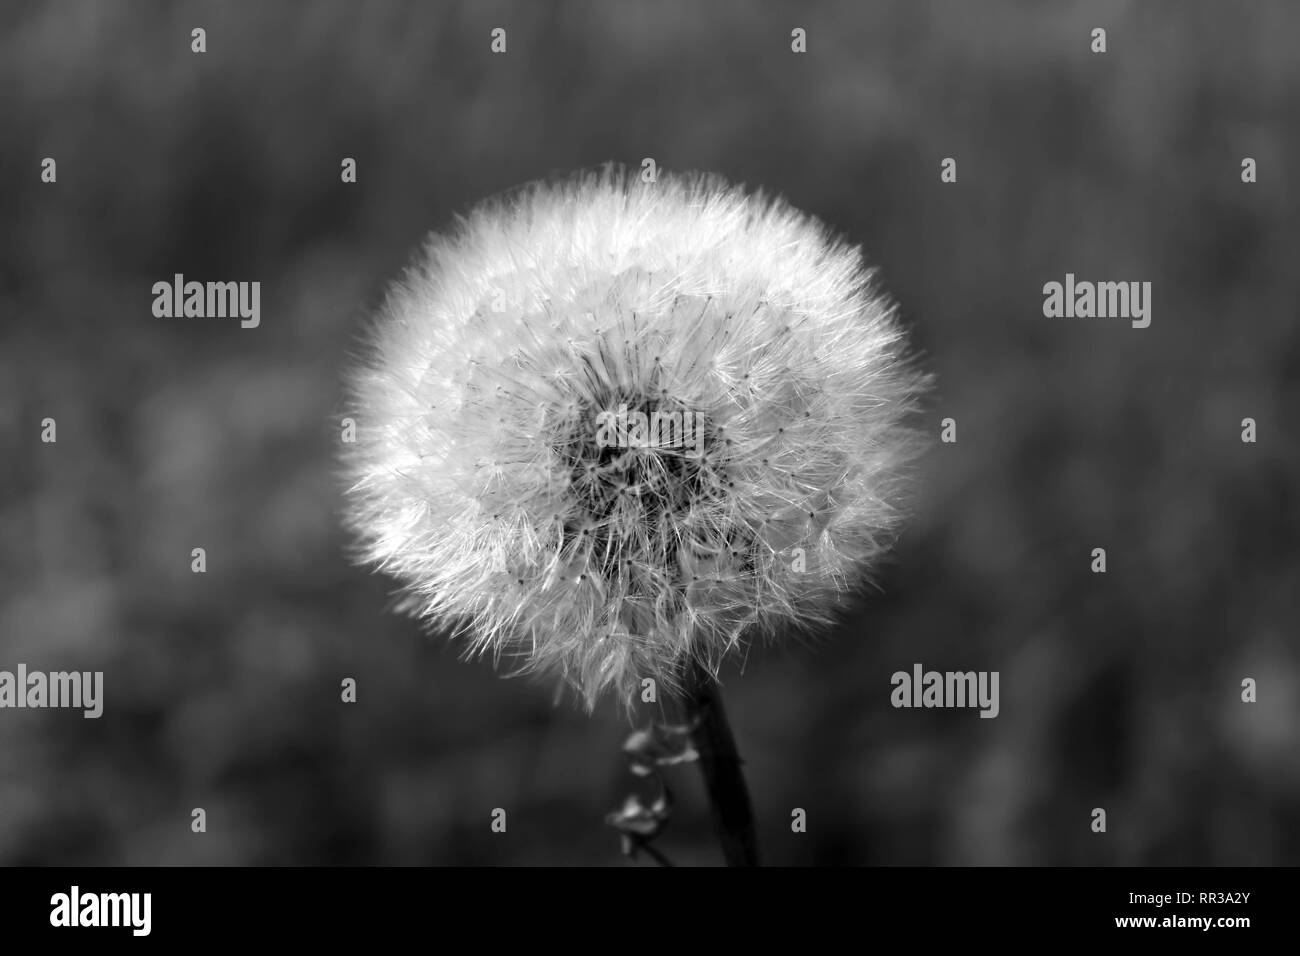 isolated dandelion clock in black and white Stock Photo - Alamy